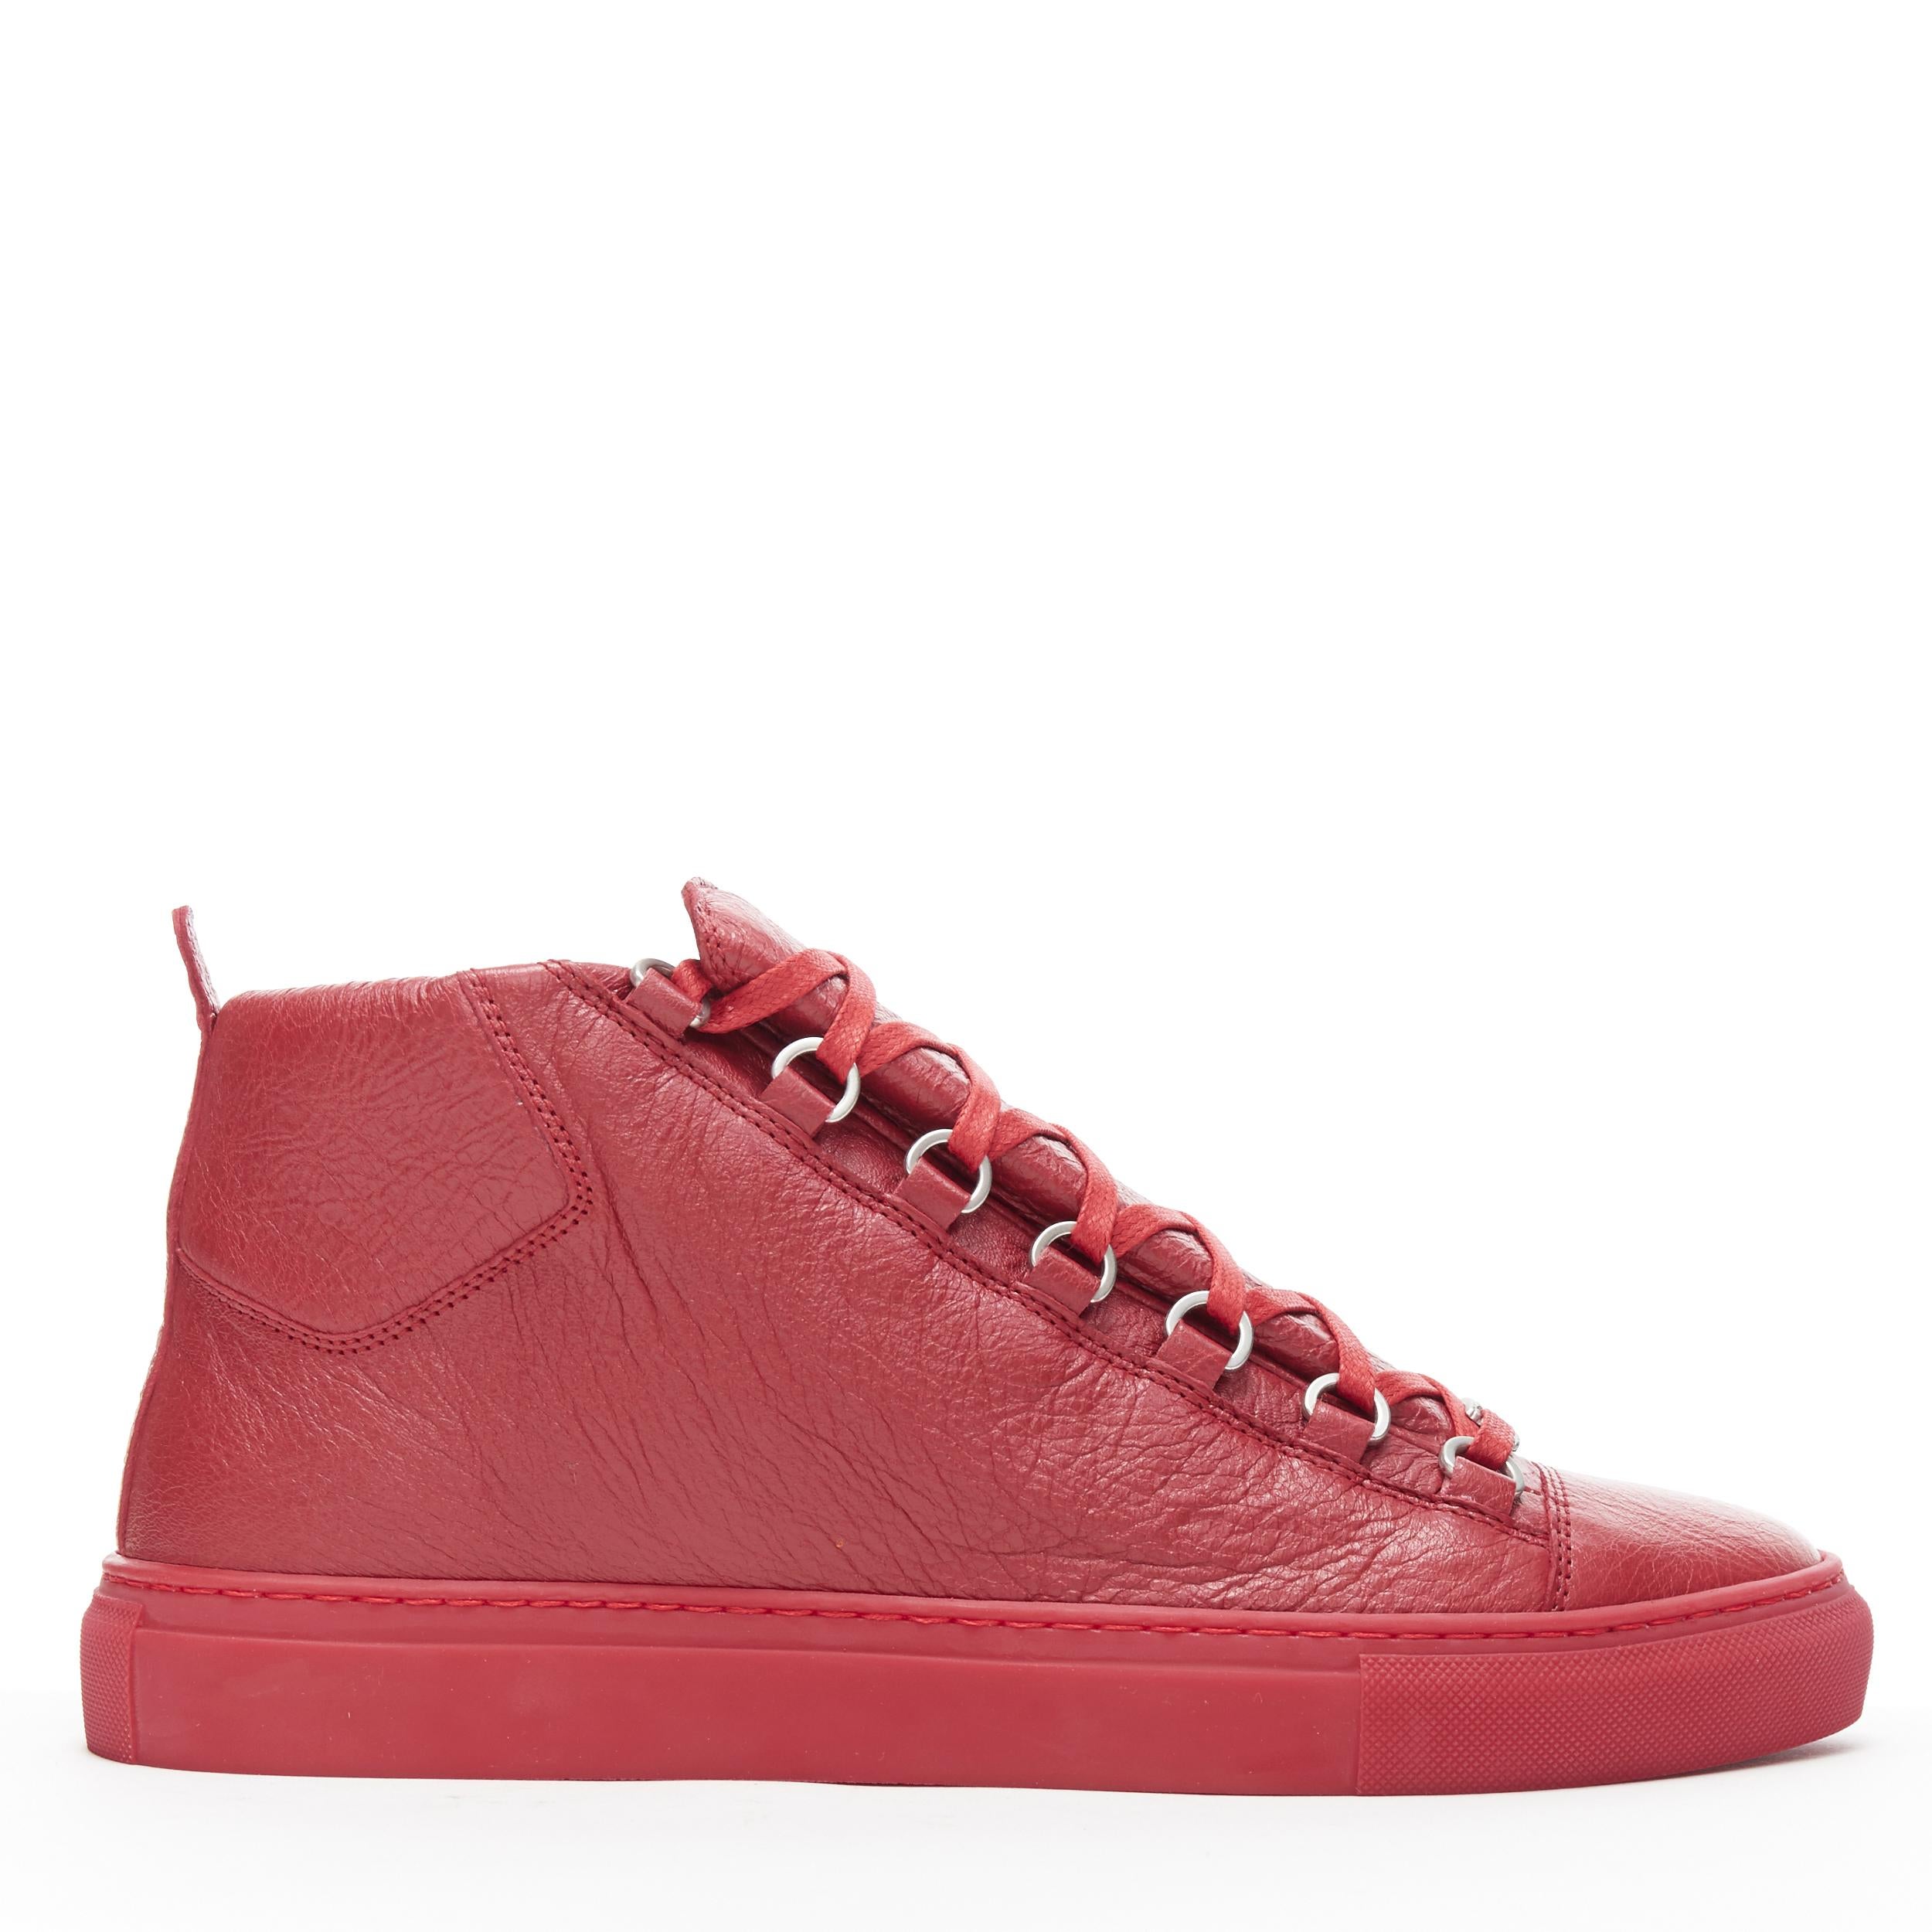 new BALENCIAGA Arena All Red high top sneakers EU41 US8 483497 WAY40 6212
Brand: Balenciaga
Model Name / Style: Balenciaga Arena
Material: Leather
Color: Red
Pattern: Solid
Closure: Lace up
Extra Detail: A classic luxury sneaker style from